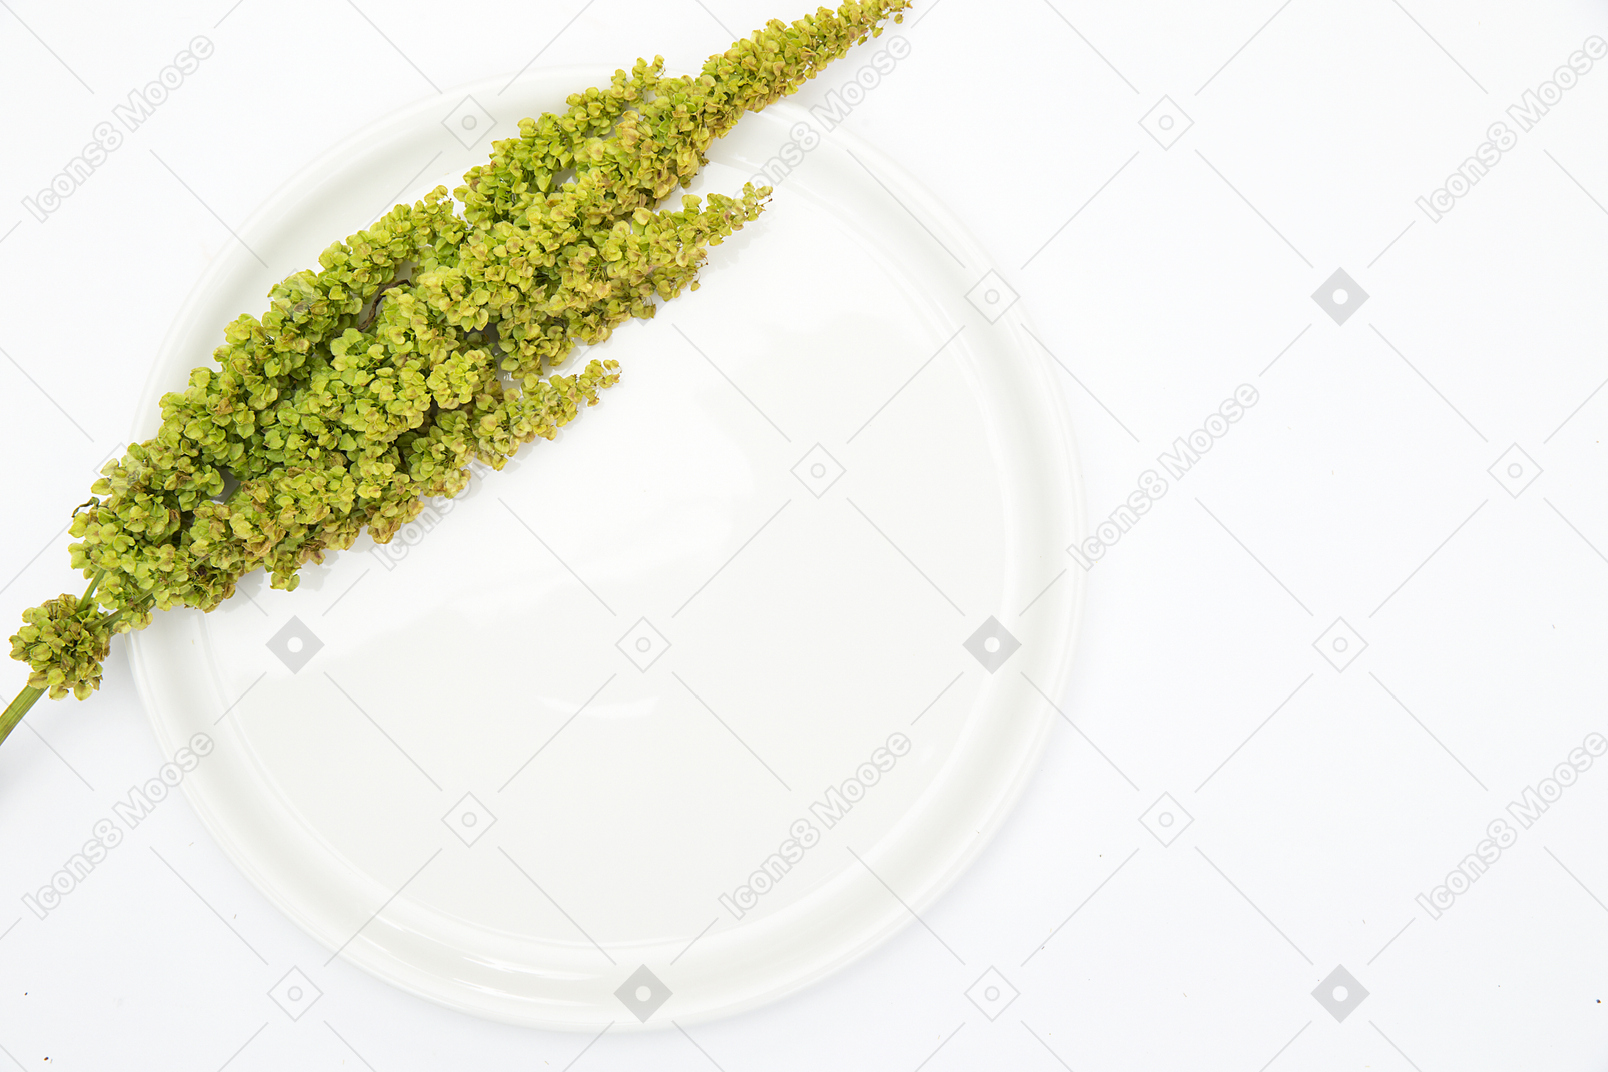 Green plant on thw white plate